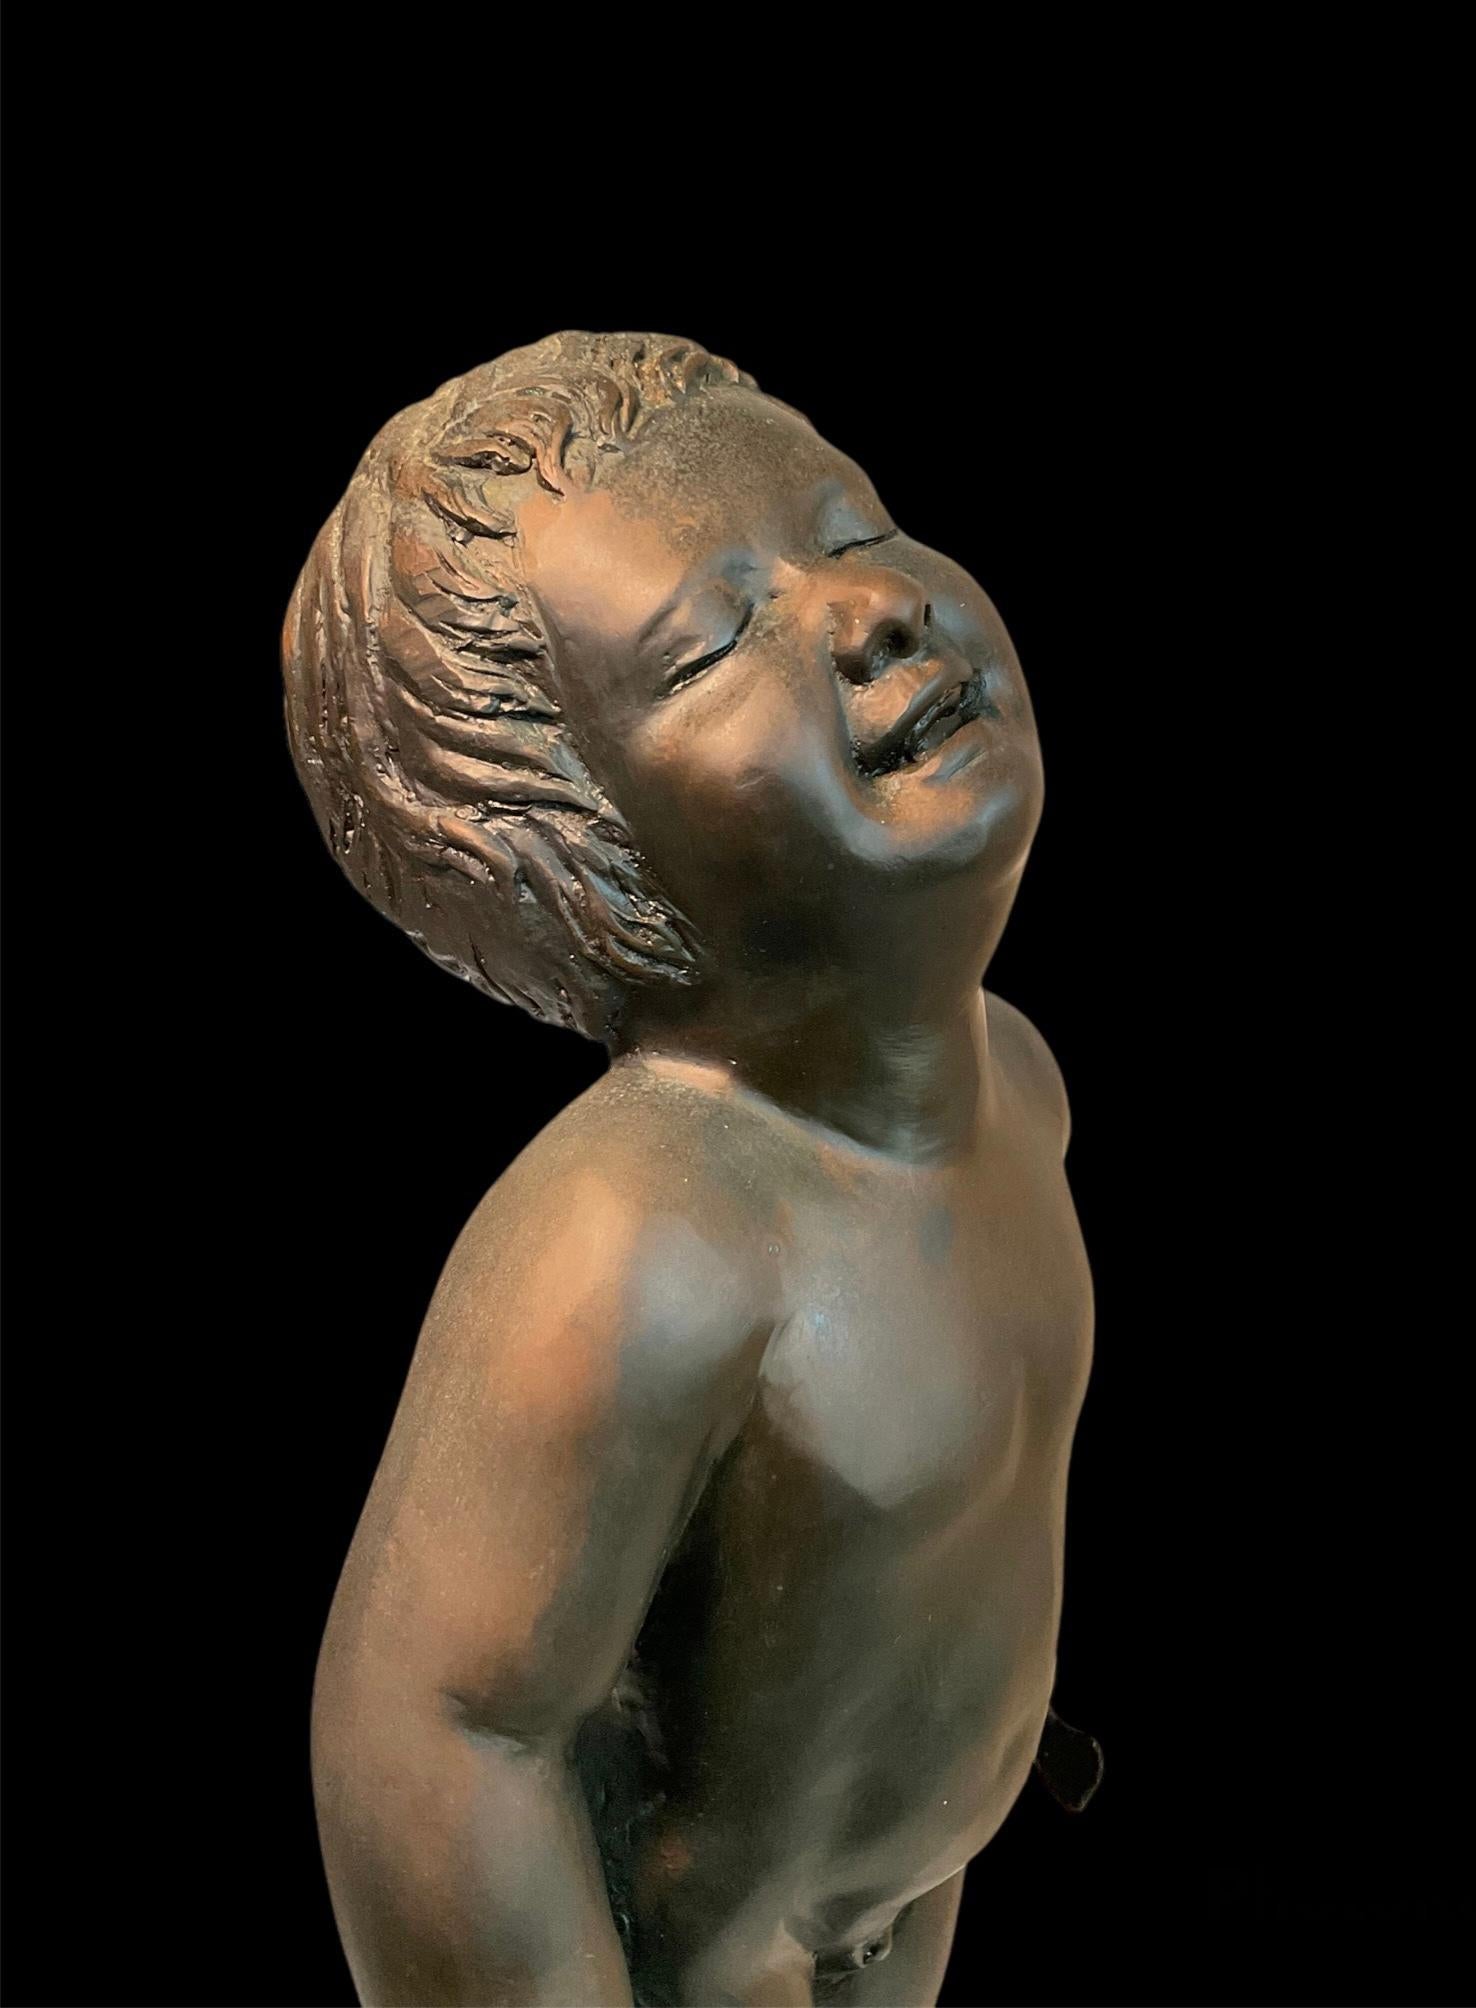 American Large Bronze Sculpture of a Nude Child After Edith Barreto Parsons-Frog Baby For Sale